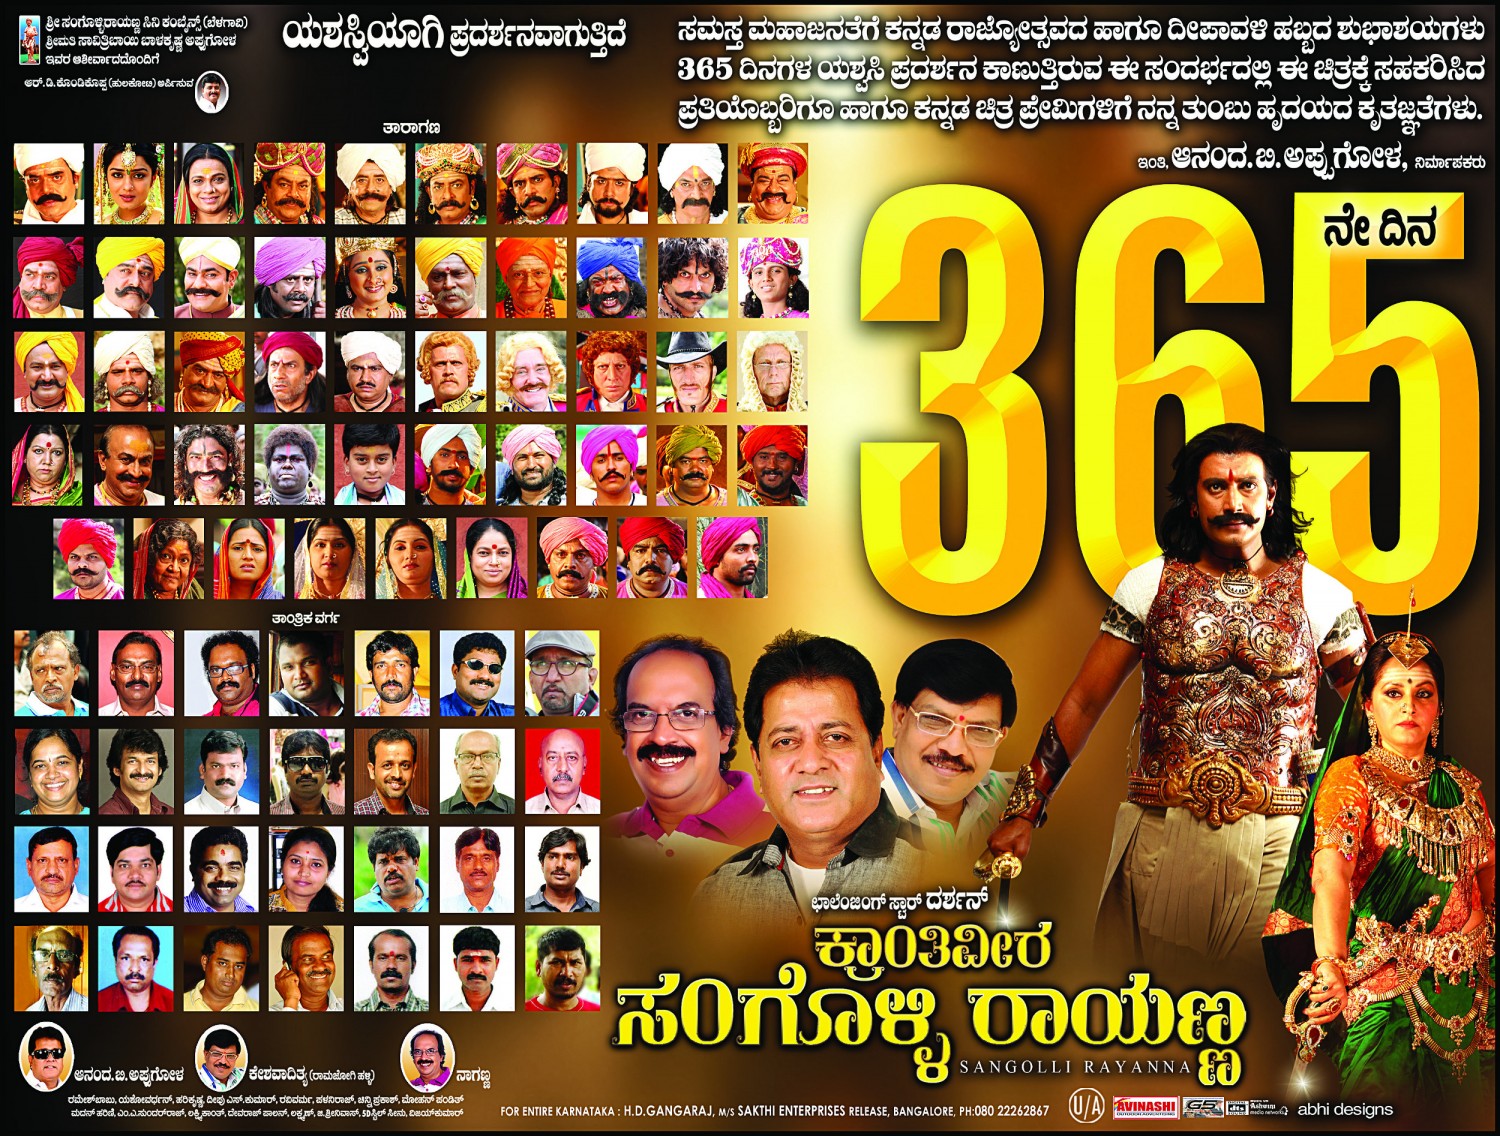 Extra Large Movie Poster Image for Sangolli Rayanna (#78 of 79)